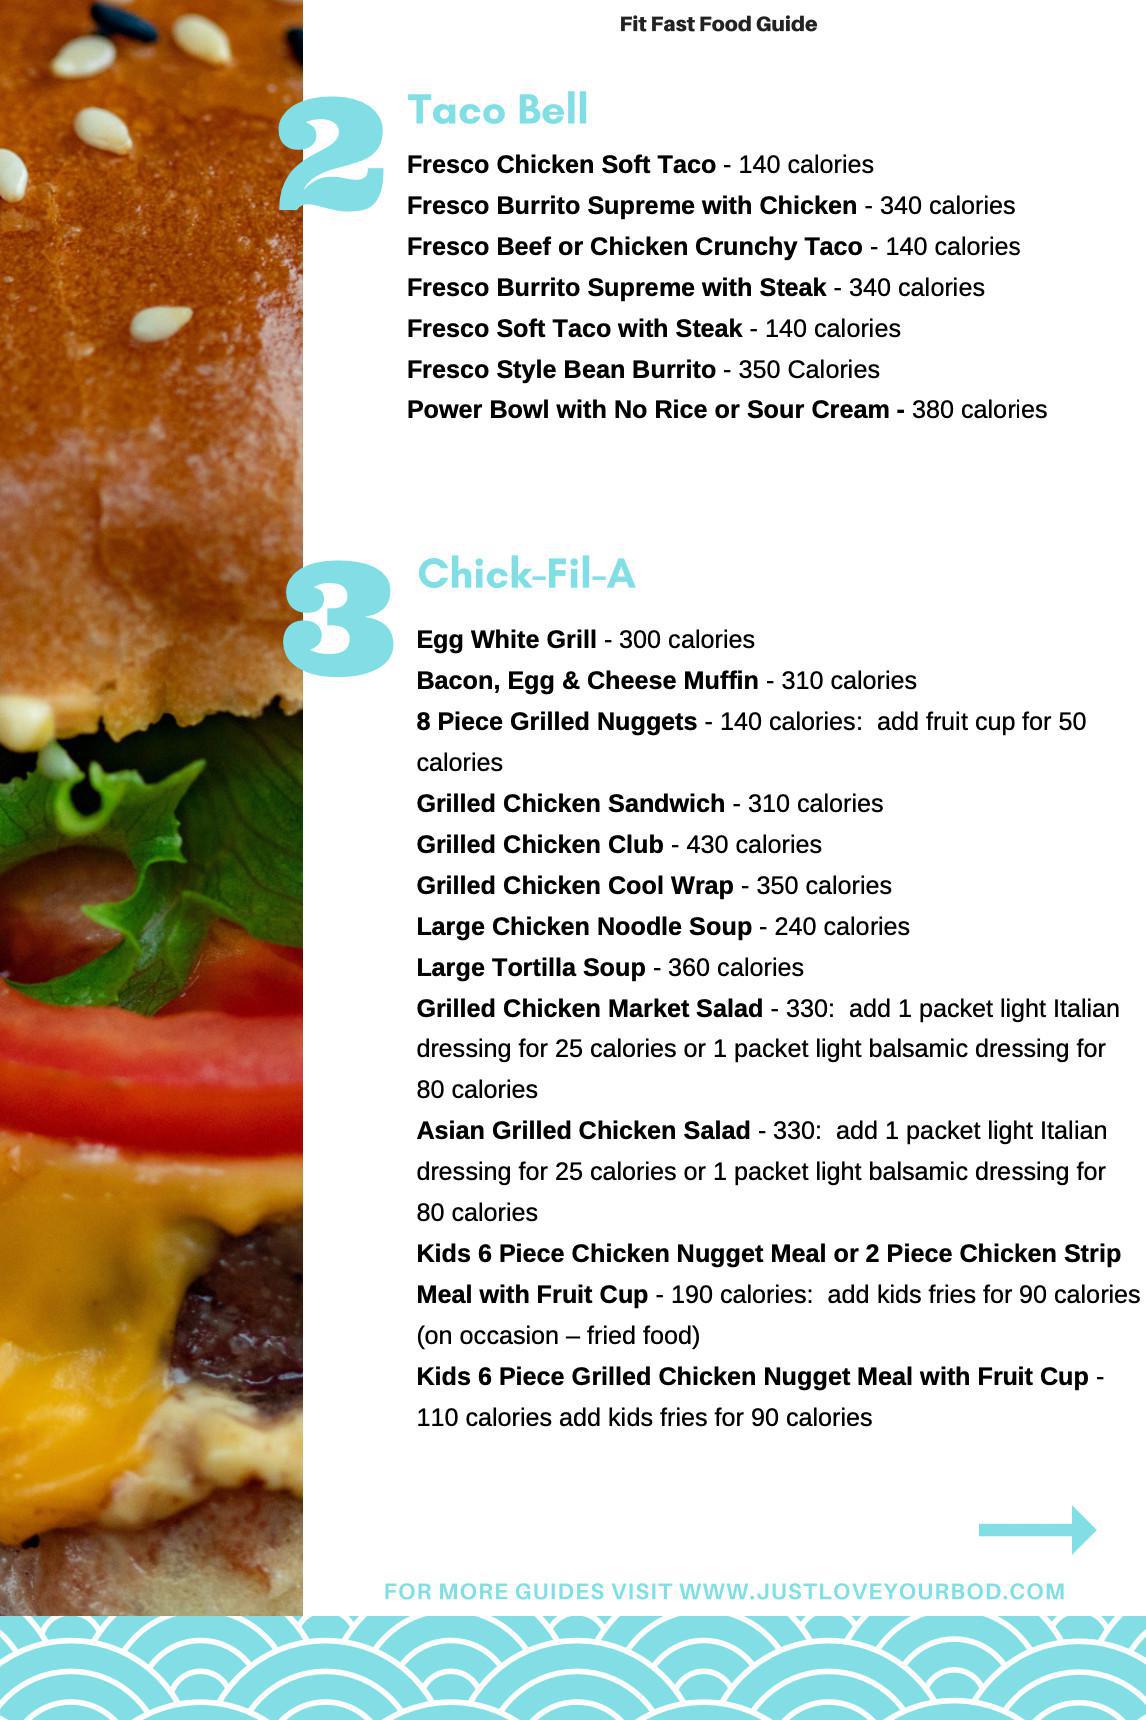 FIT FAST FOOD GUIDE 